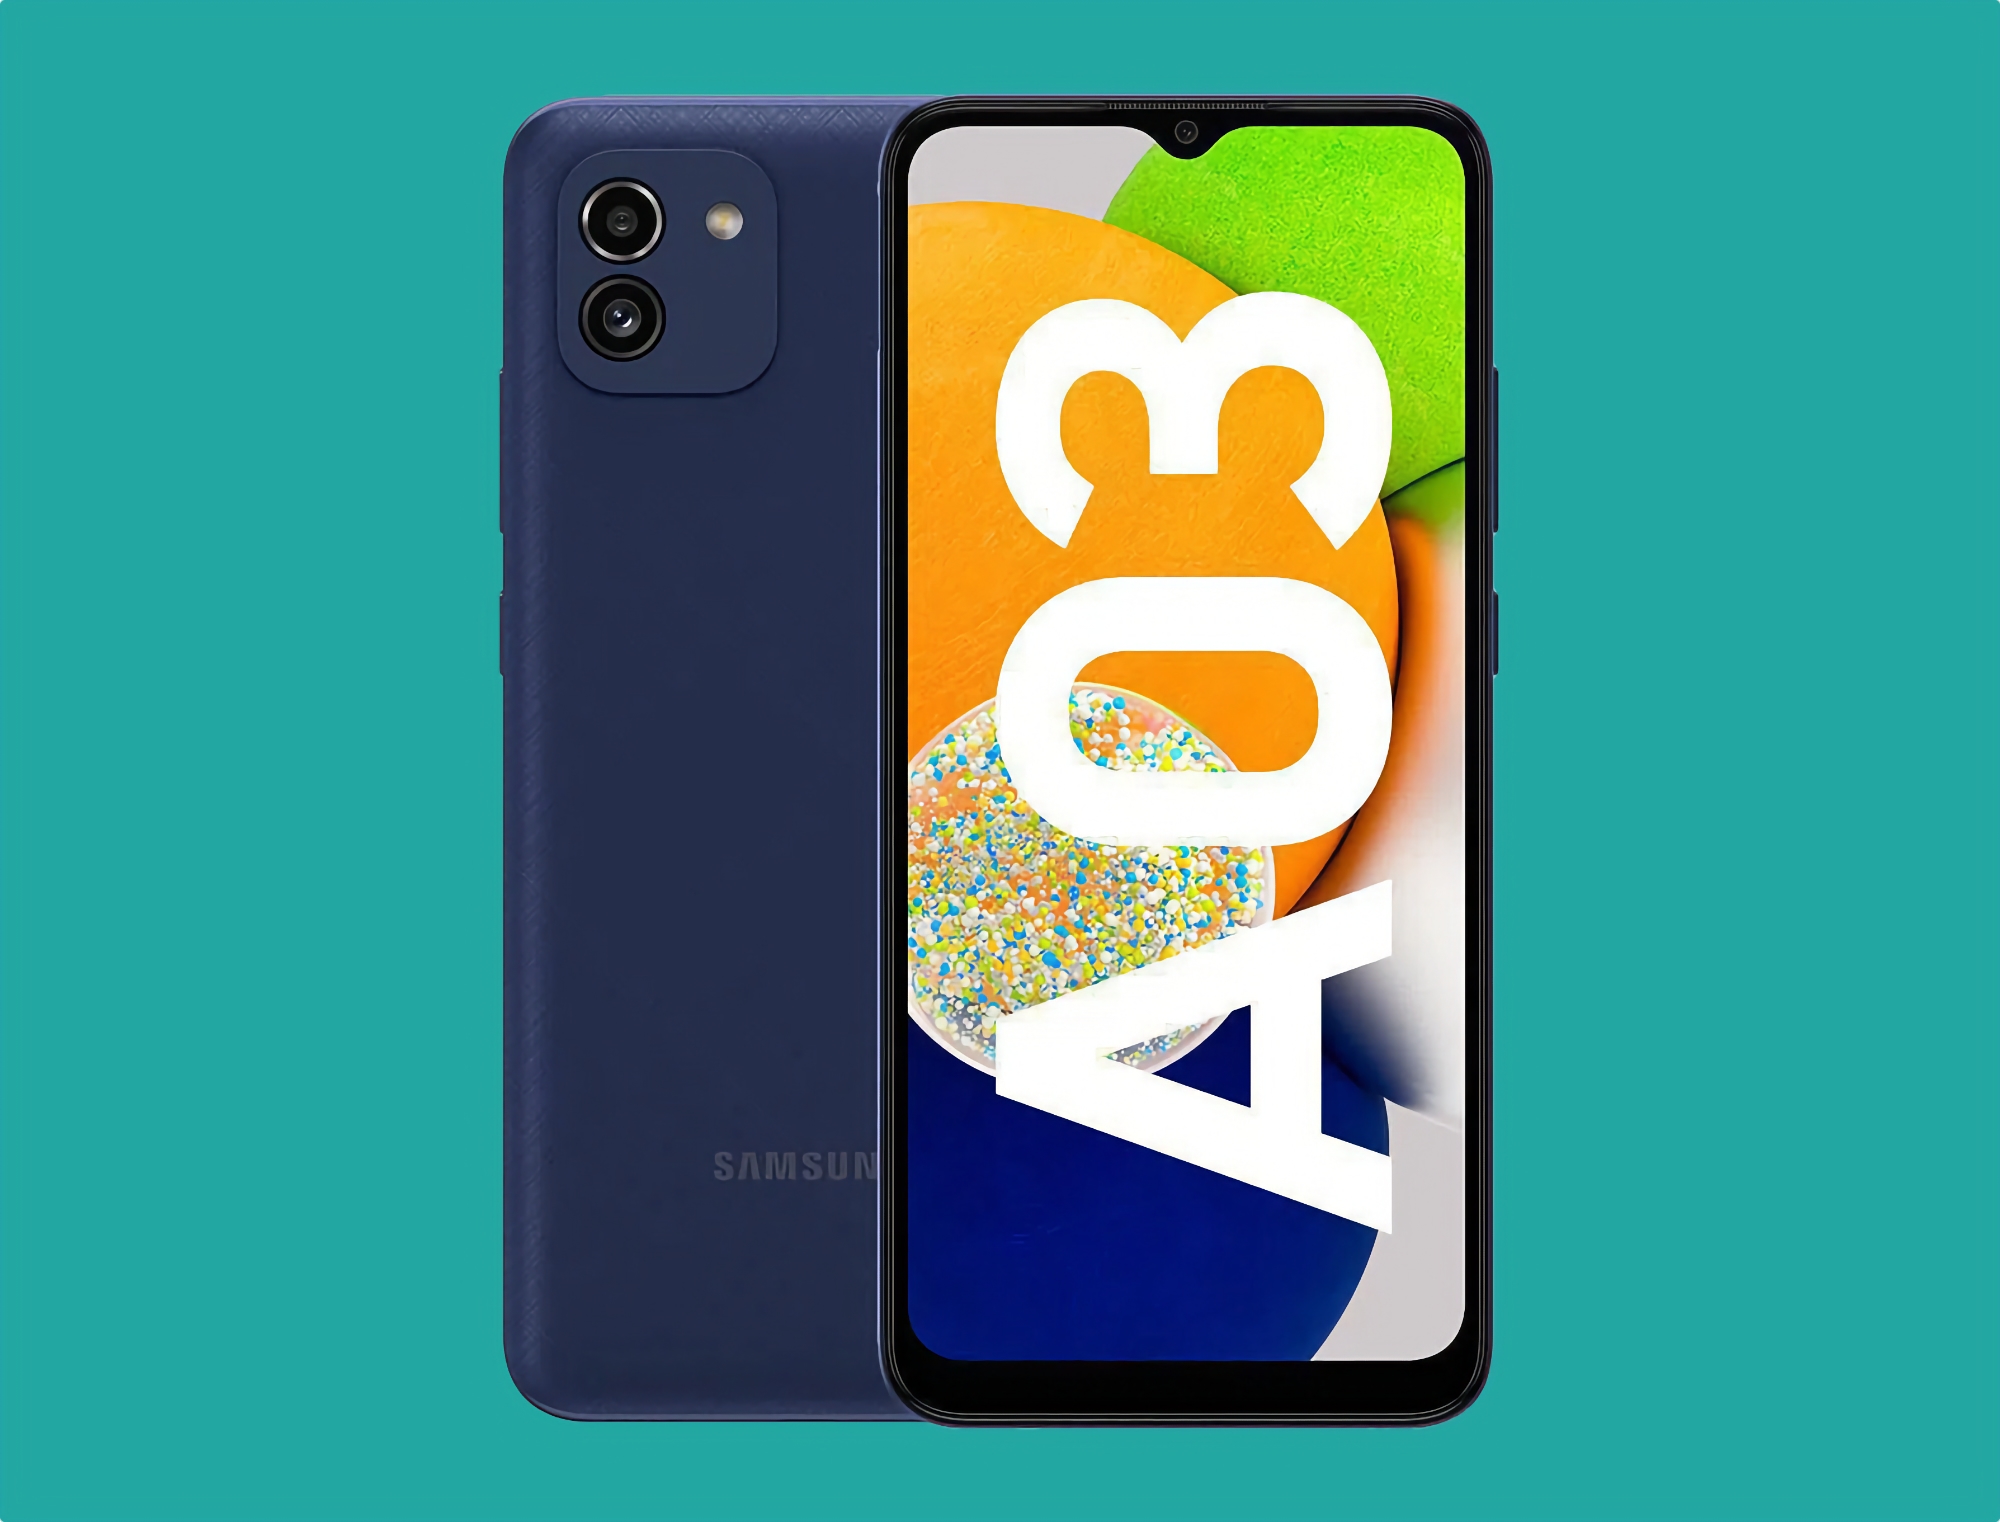 Following the Galaxy F12: Samsung started updating the budget smartphone Galaxy A03 to Android 13 (One UI Core 5.0)